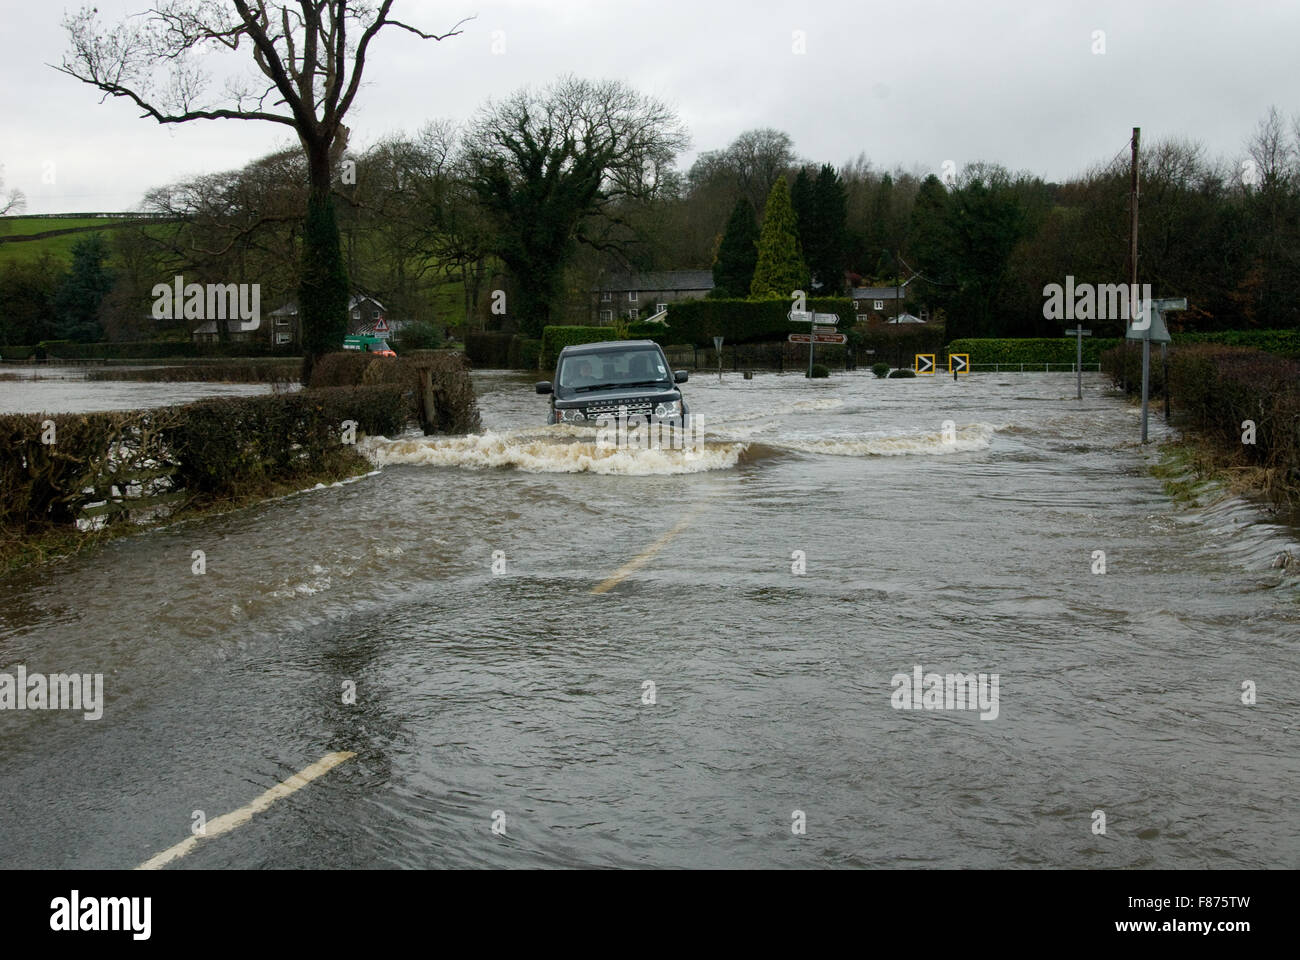 The driver of a Land Rover Discovery is not deterred by extreme flooding in Sawley, Lancashire caused by Storm Desmond. Stock Photo